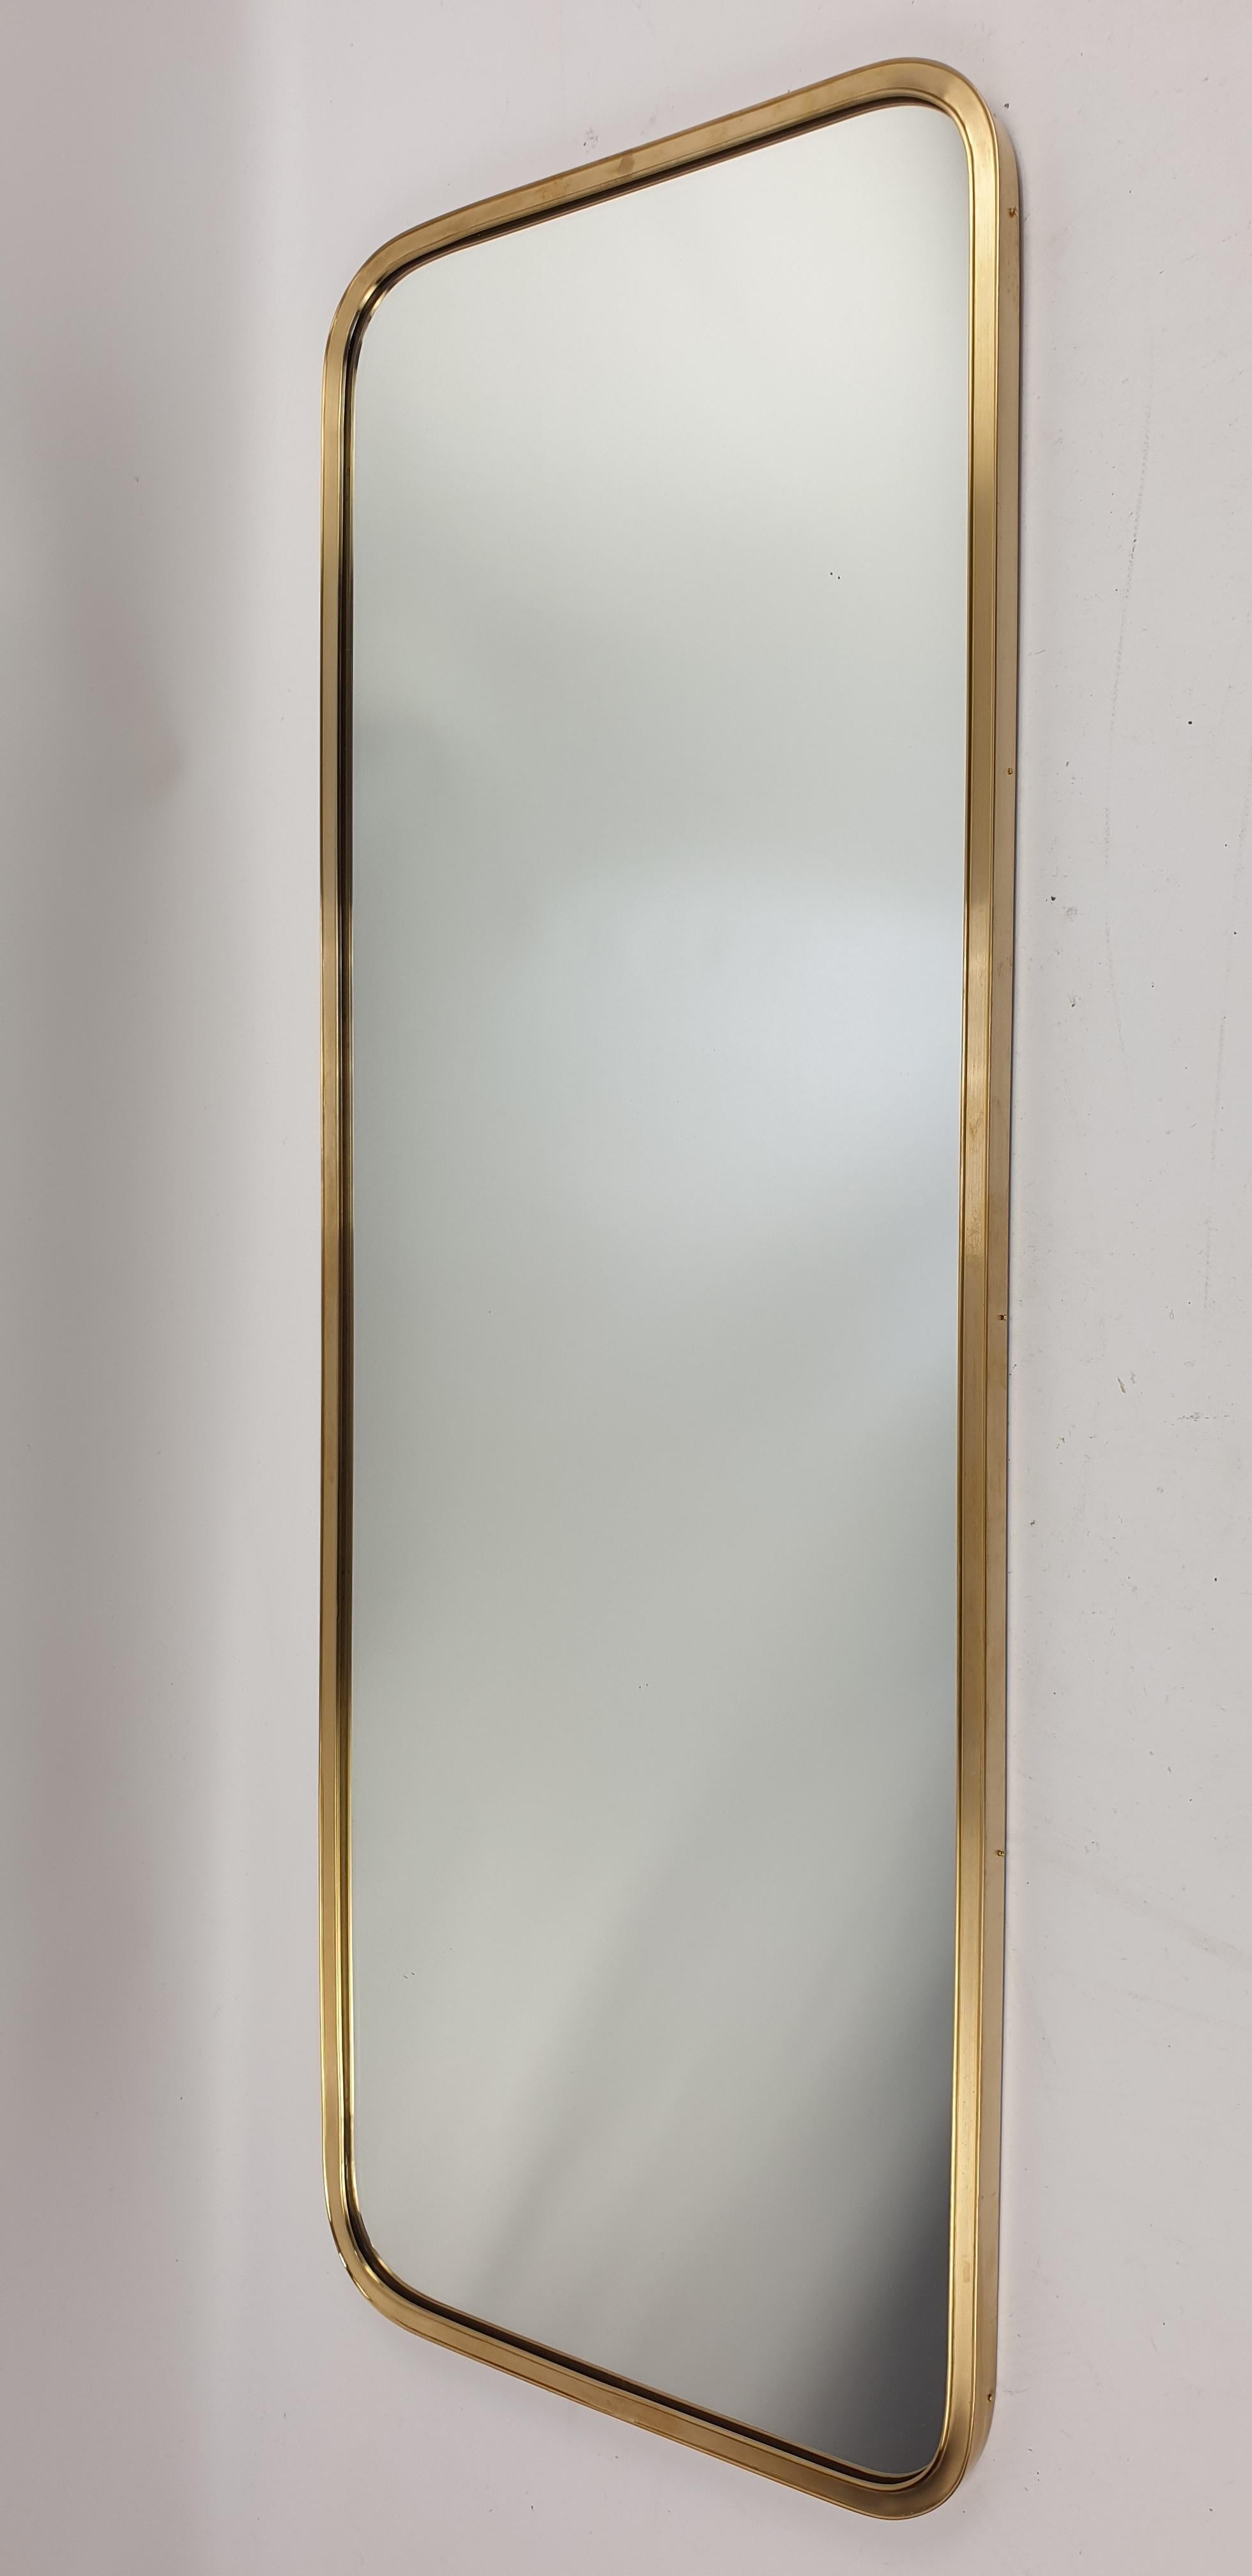 Gorgeous and elegant vintage wall mirror with deep solid brass frame and crystal mirror glass. Original and made in Italy in the 50’s, this is no reproduction. The mirror glass has been renewed, so it is in perfect condition.